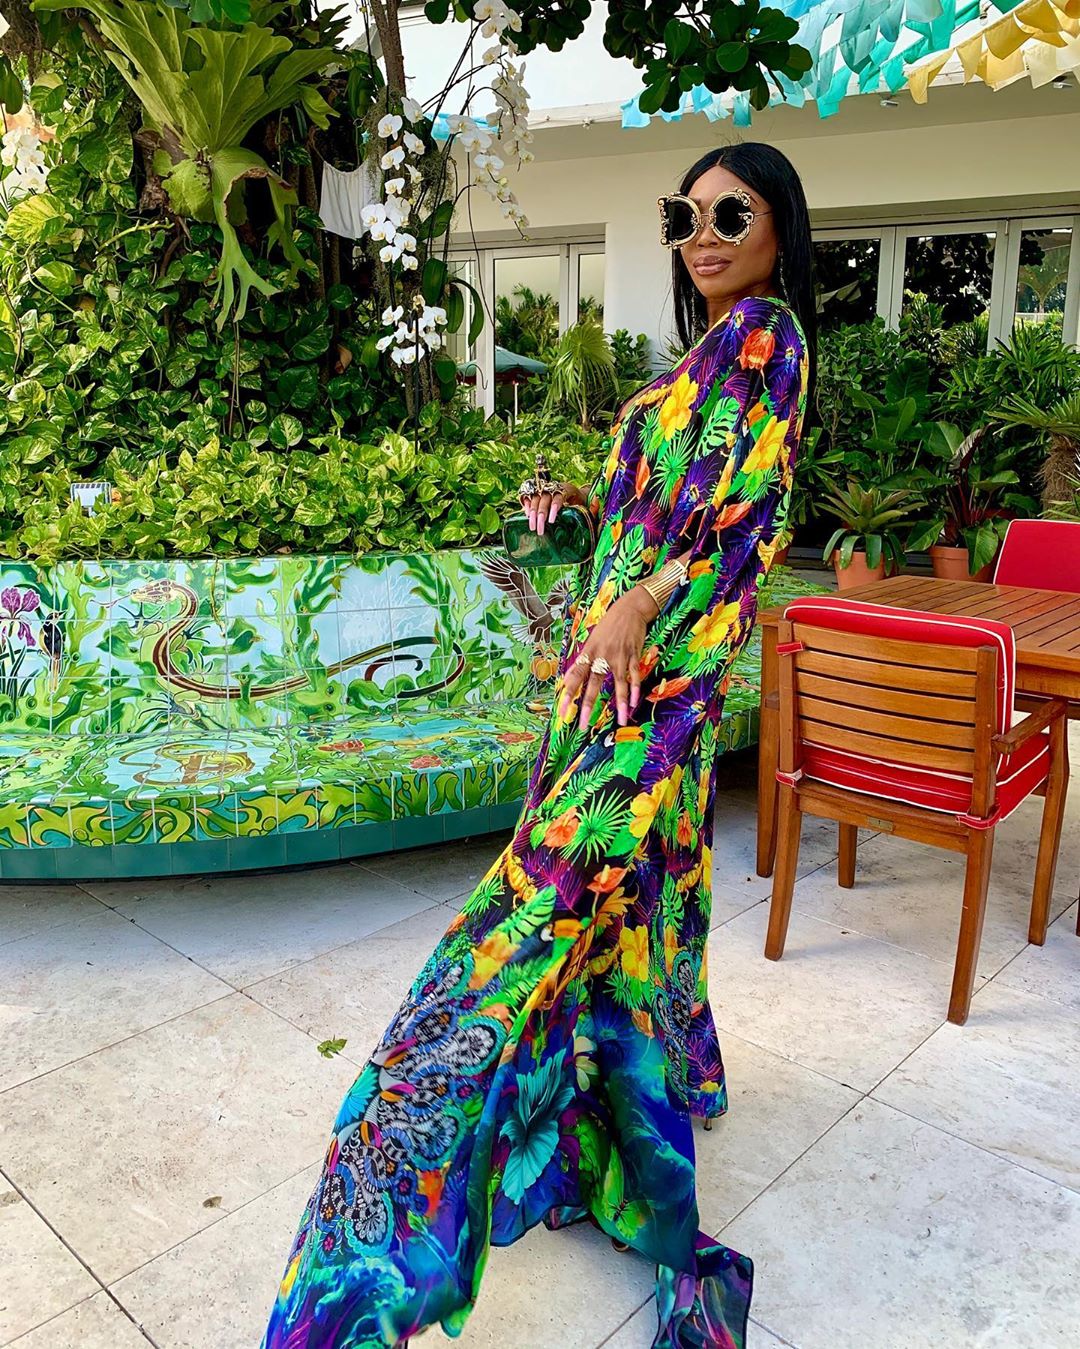 The Chic Caftan All Your Favorite Celebrities Are Wearing